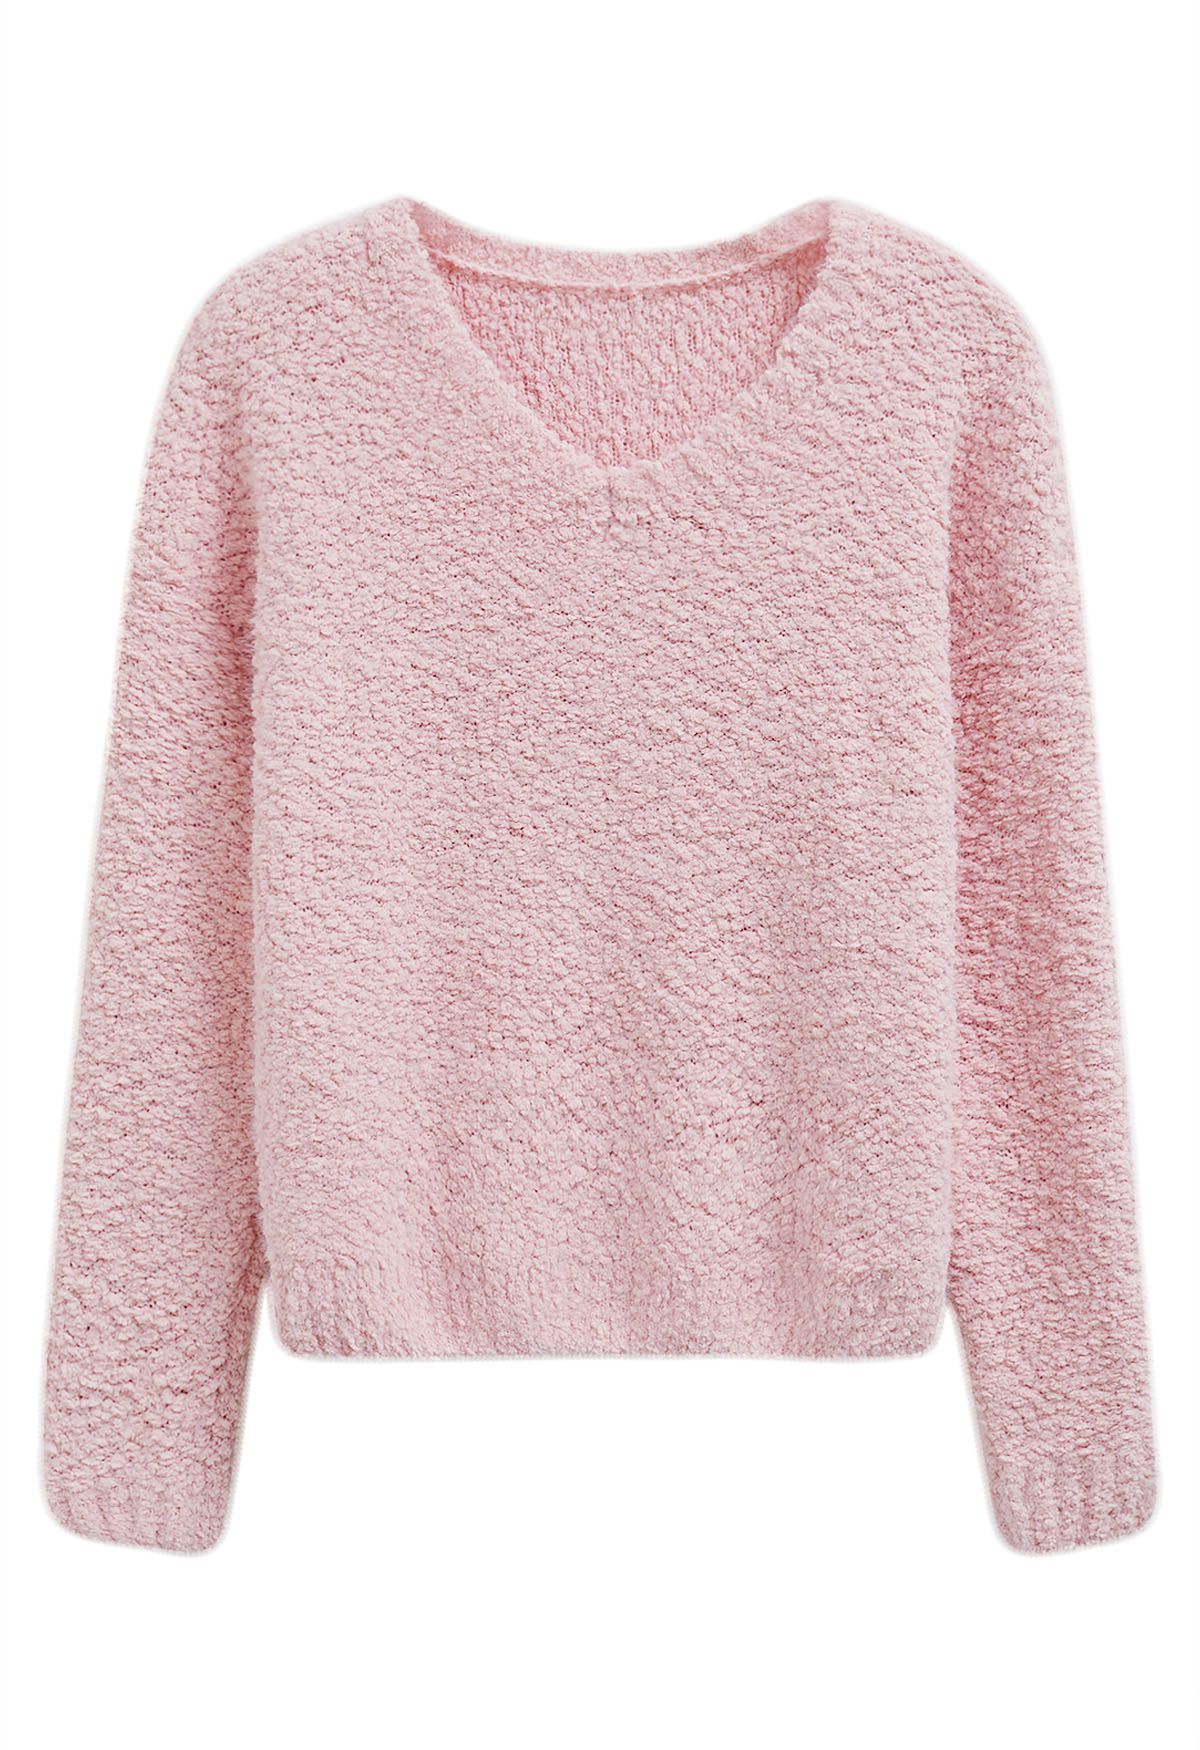 Snug V-Neck Fuzzy Knit Sweater in Pink - Retro, Indie and Unique Fashion